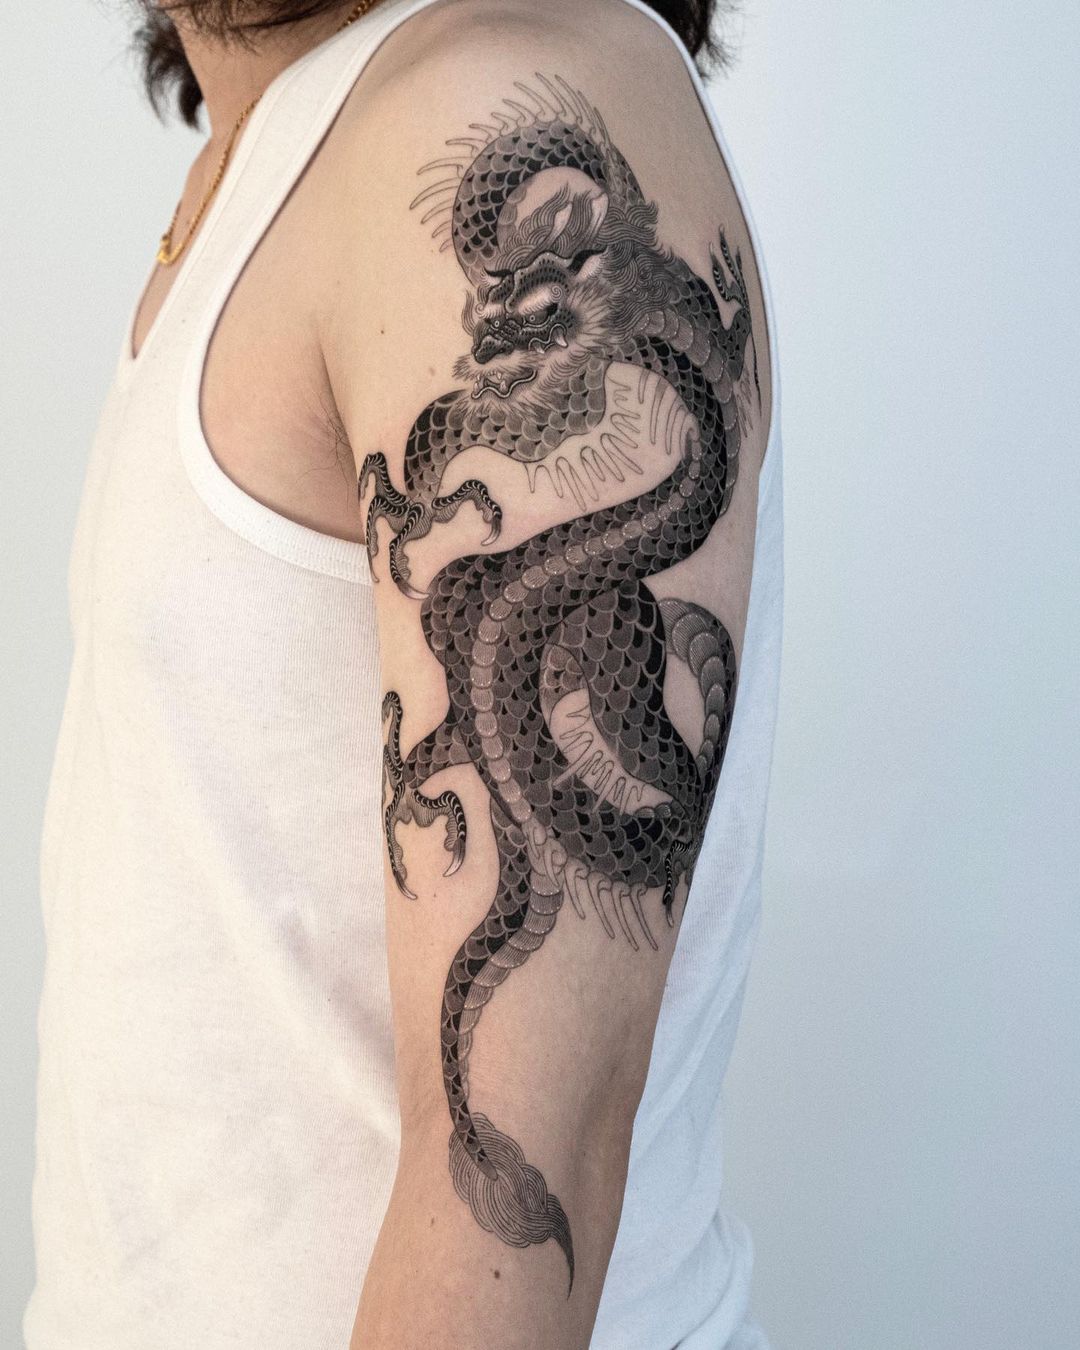 Dragon tattoo on arm by dokgonoing